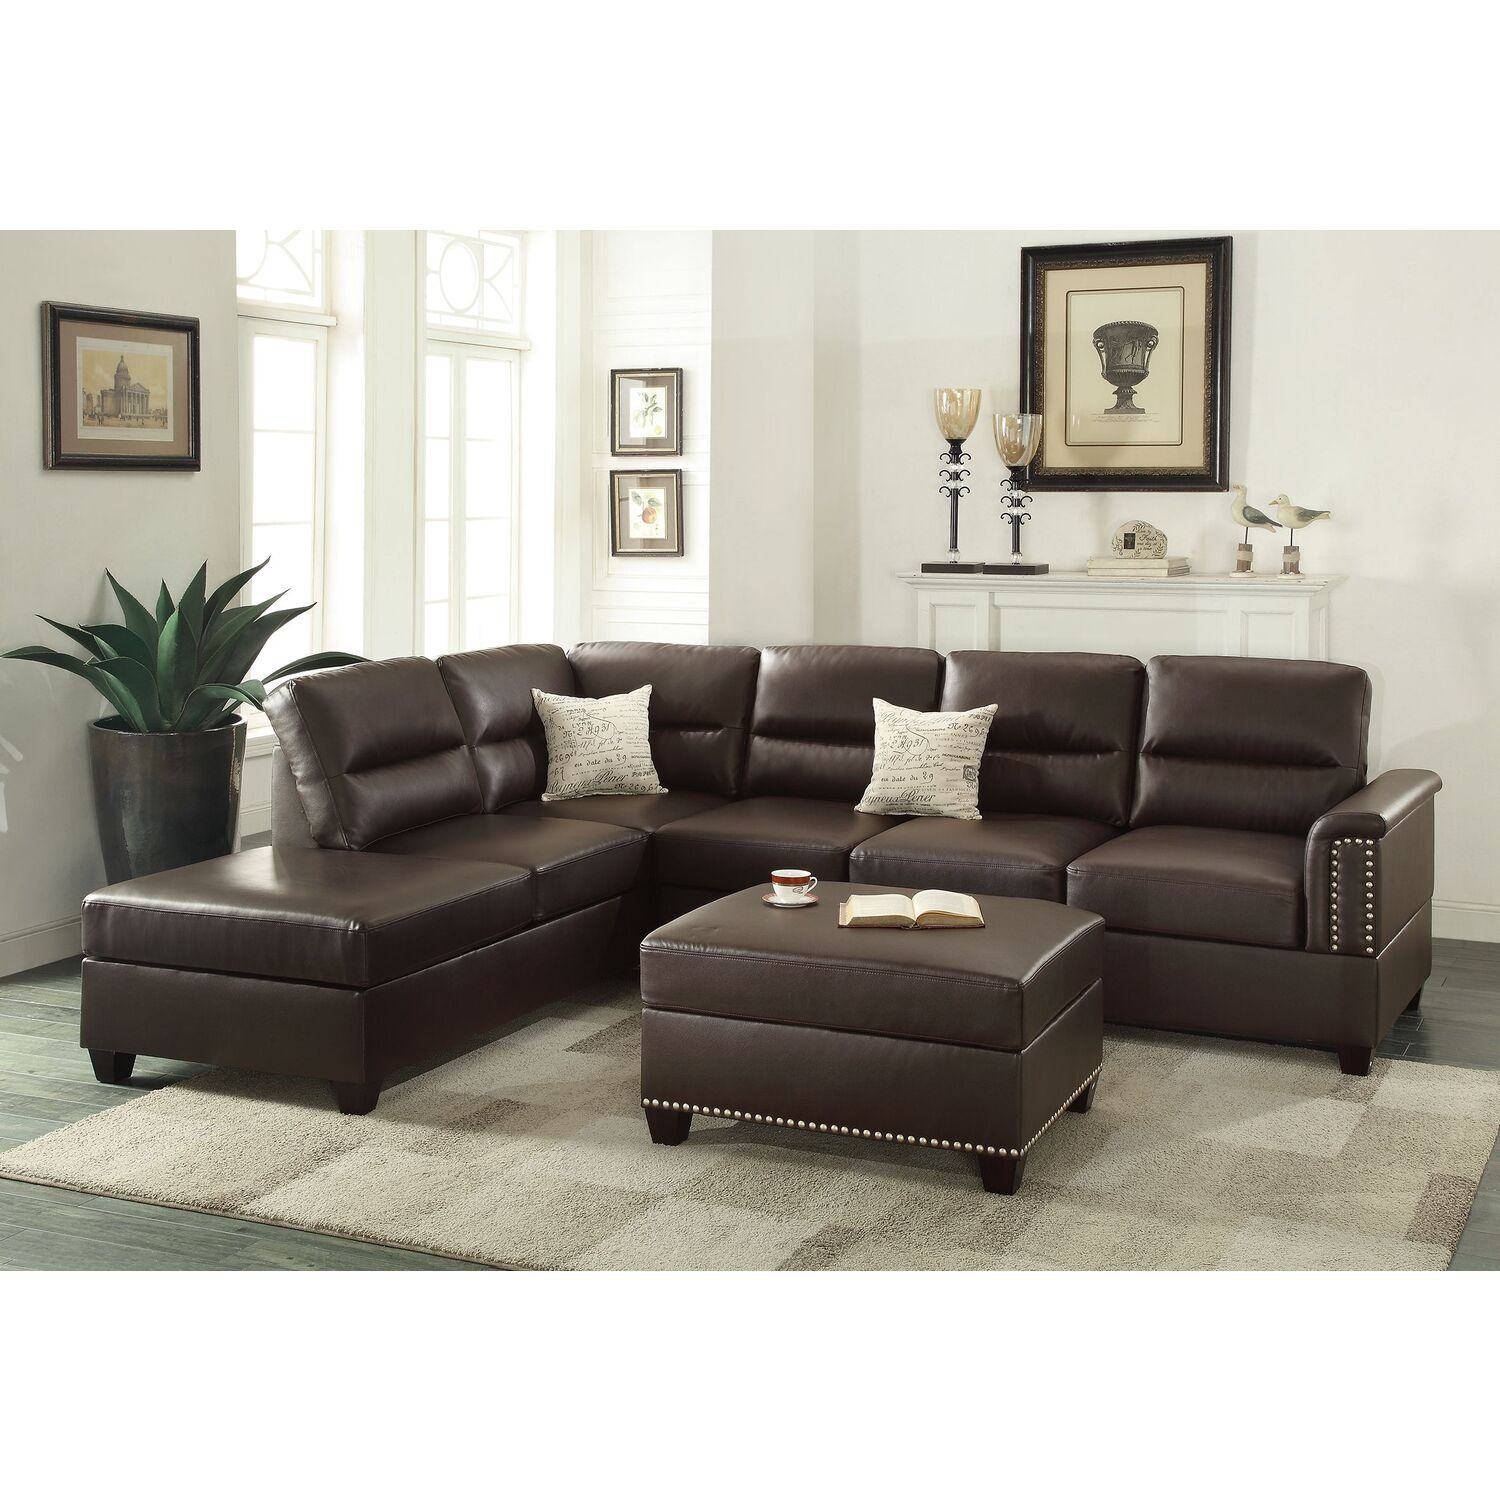 Luxurious Chocolate Brown Sectional Sofa with Chaise: The Ultimate Comfort and Style